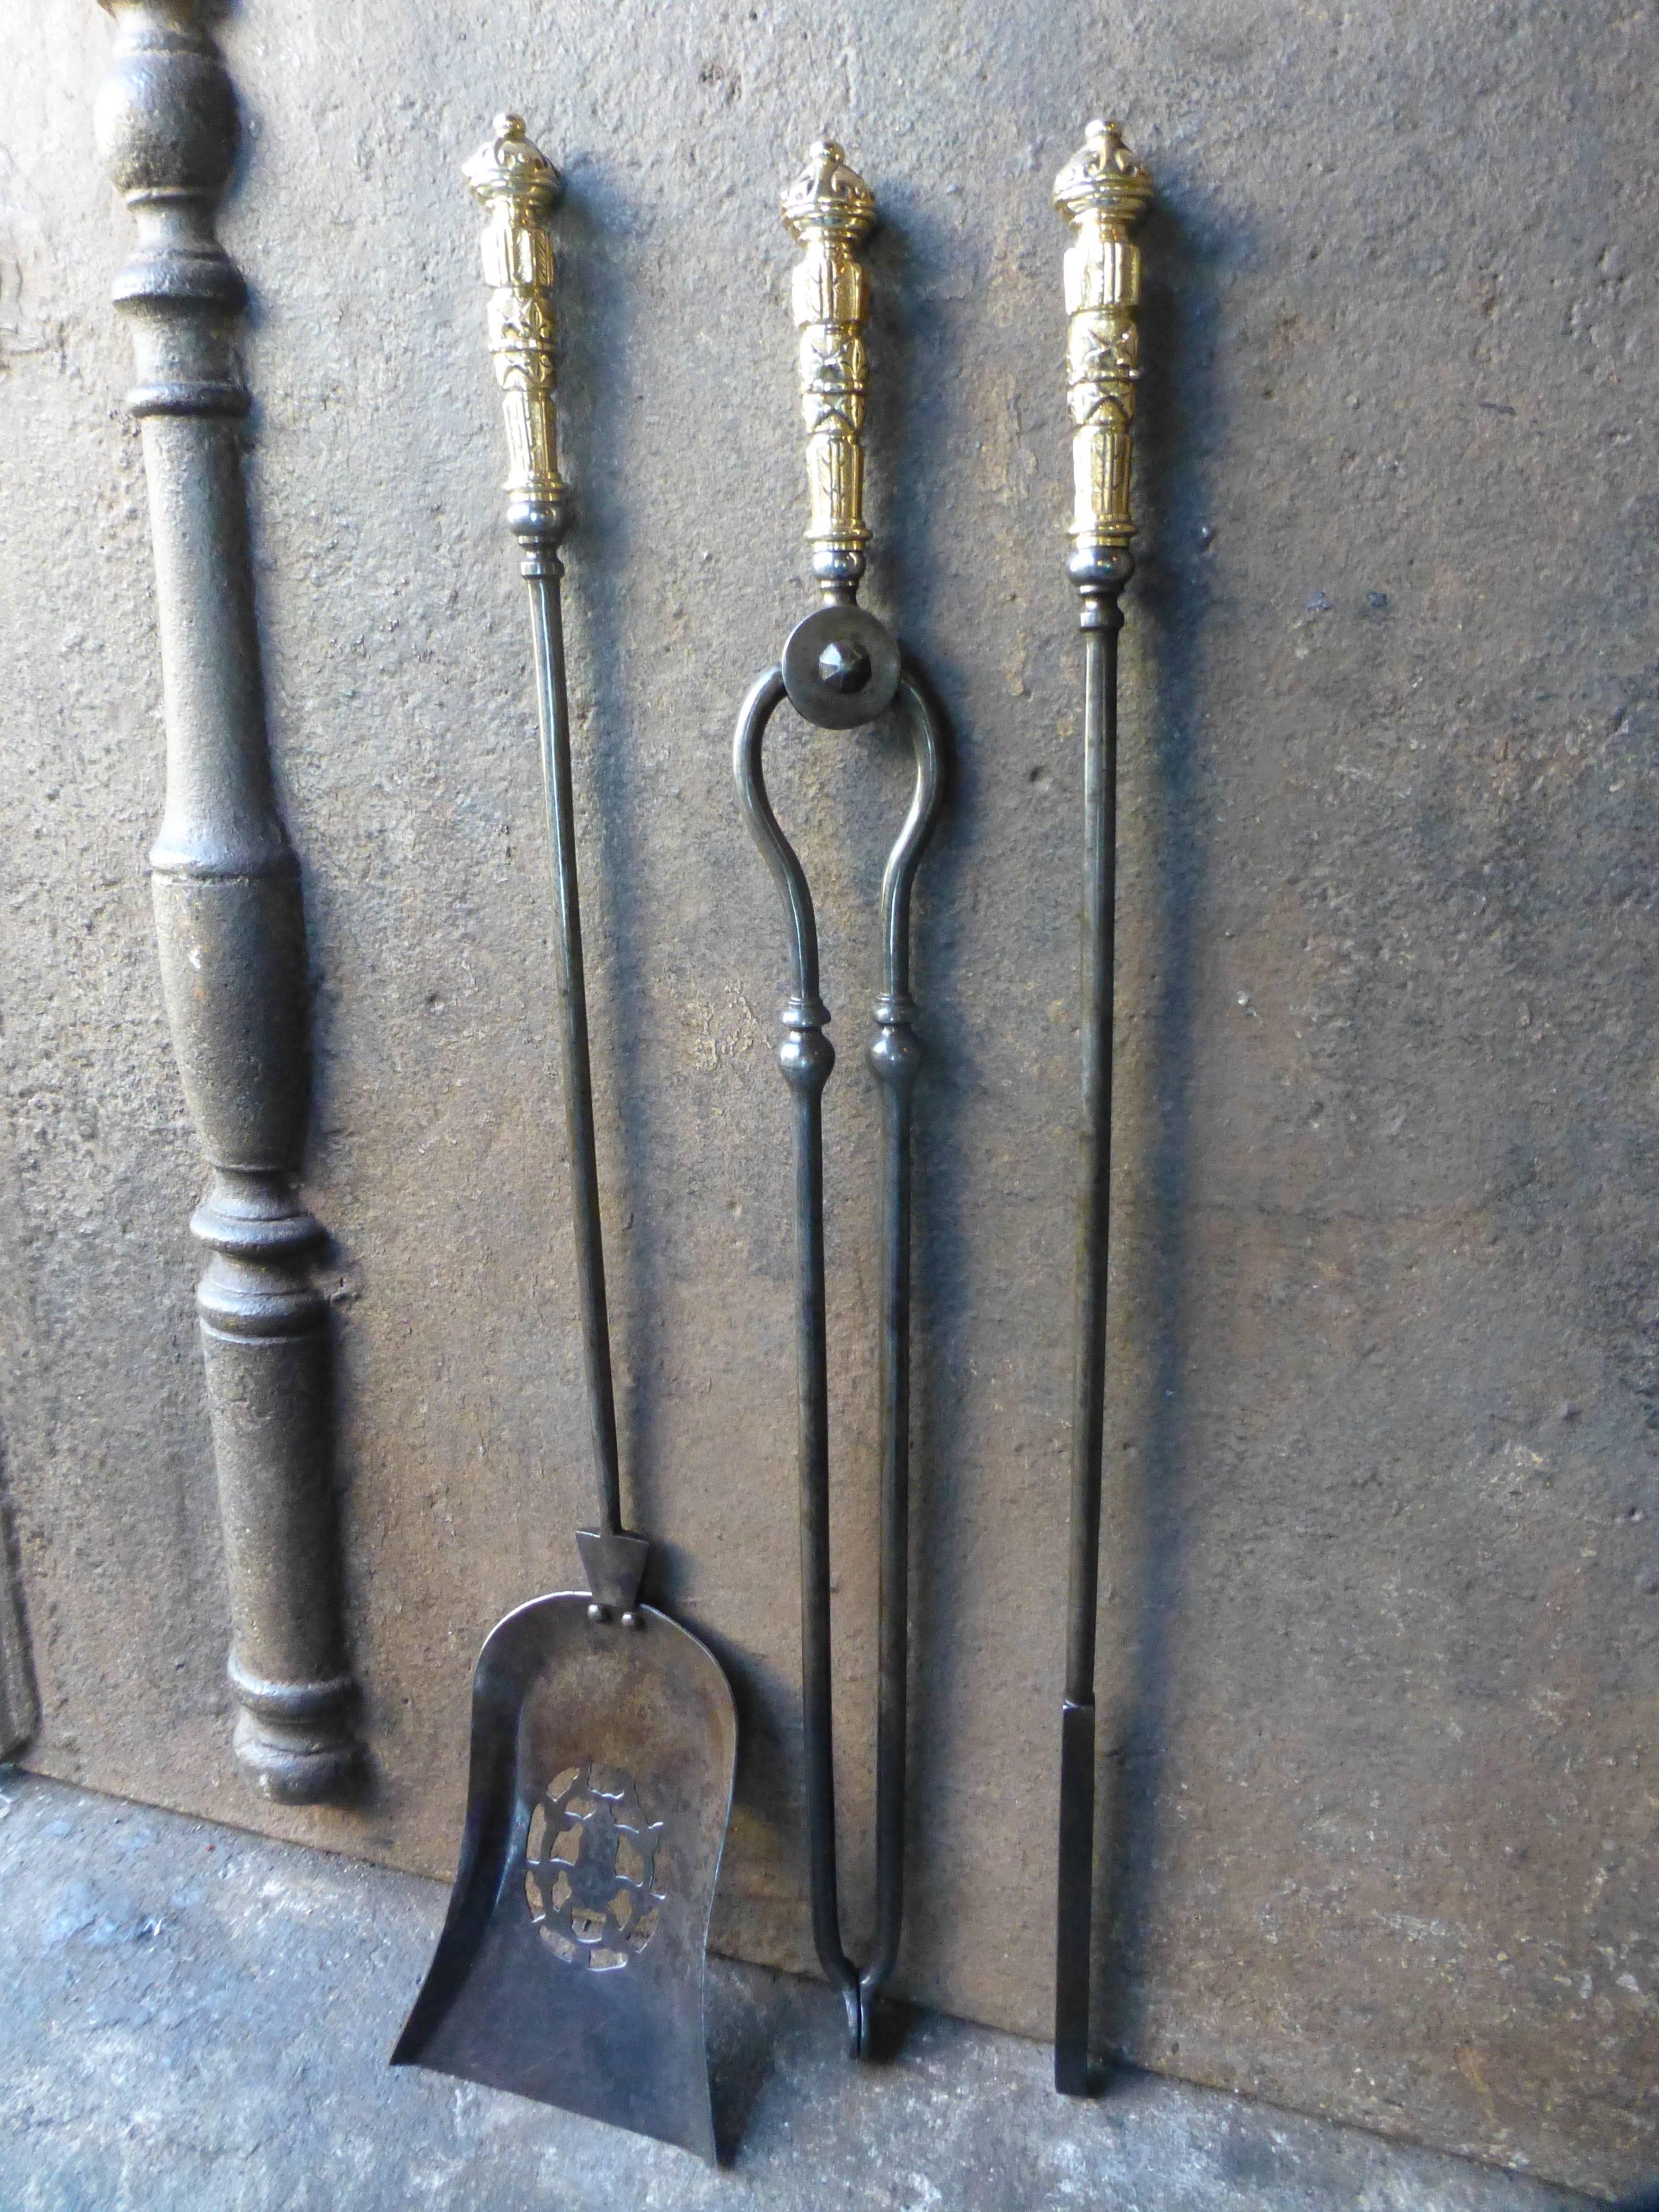 19th century English fireplace tool set.

We have a unique and specialized collection of antique and used fireplace accessories consisting of more than 1000 listings at 1stdibs. Amongst others, we always have 500+ firebacks, 400+ pairs of andirons